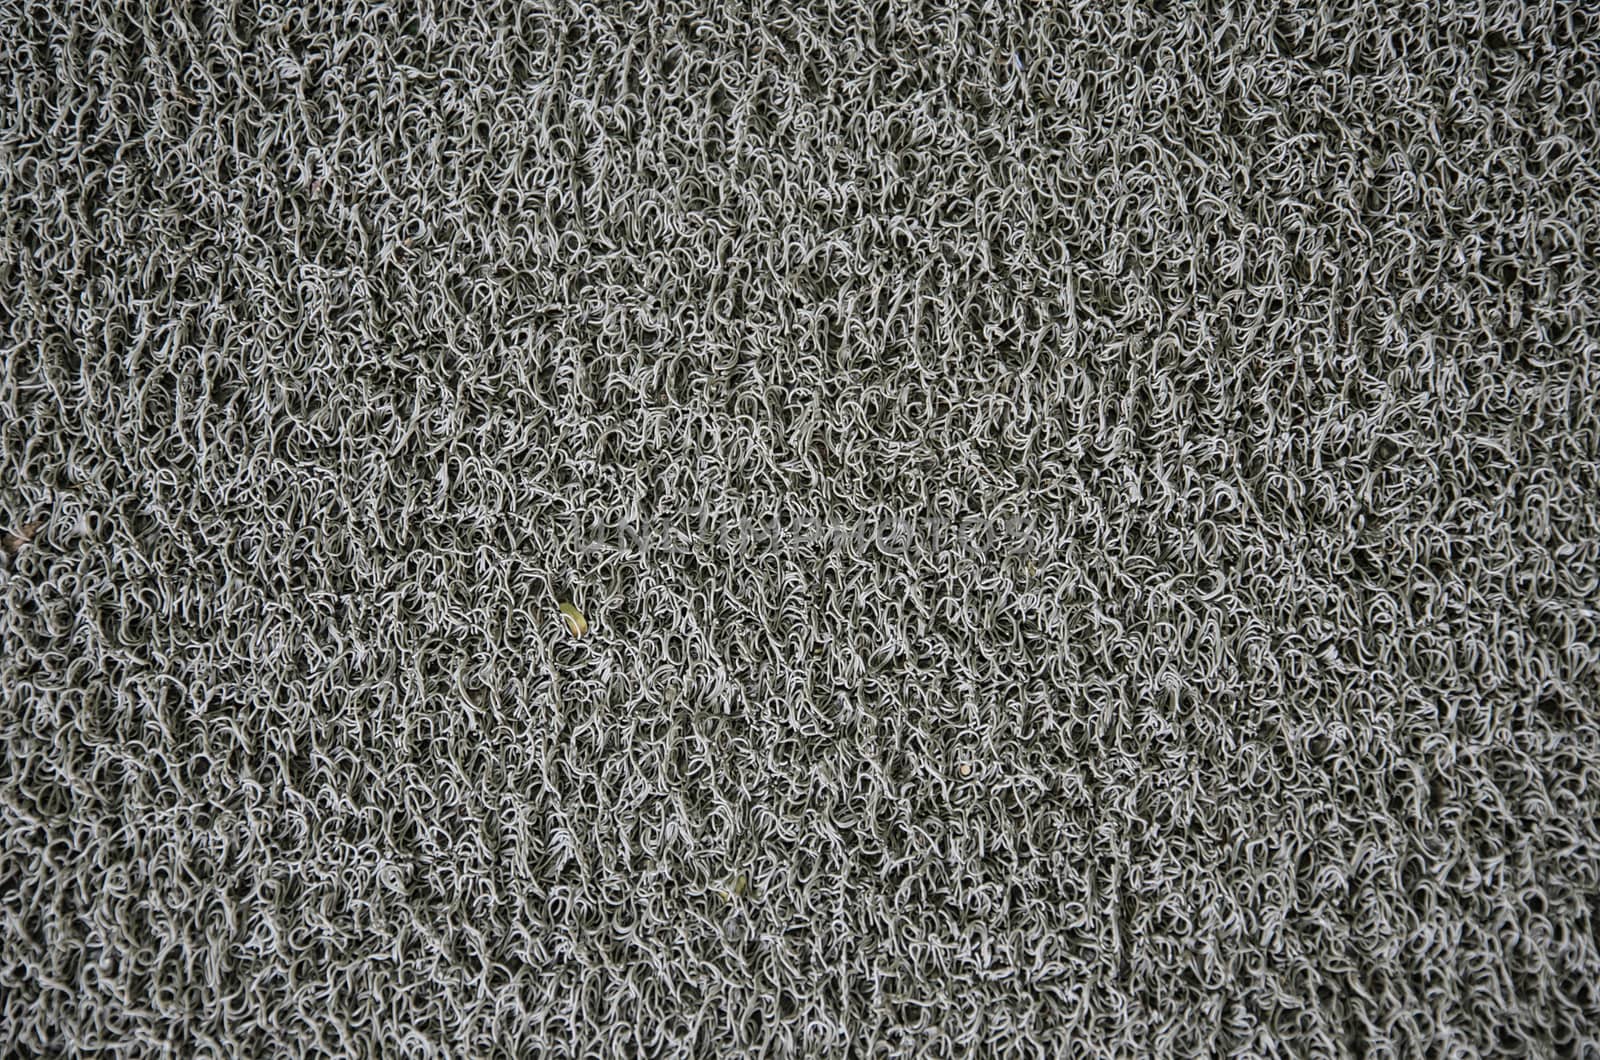 Gray synthetic fiber texture of household scrubber